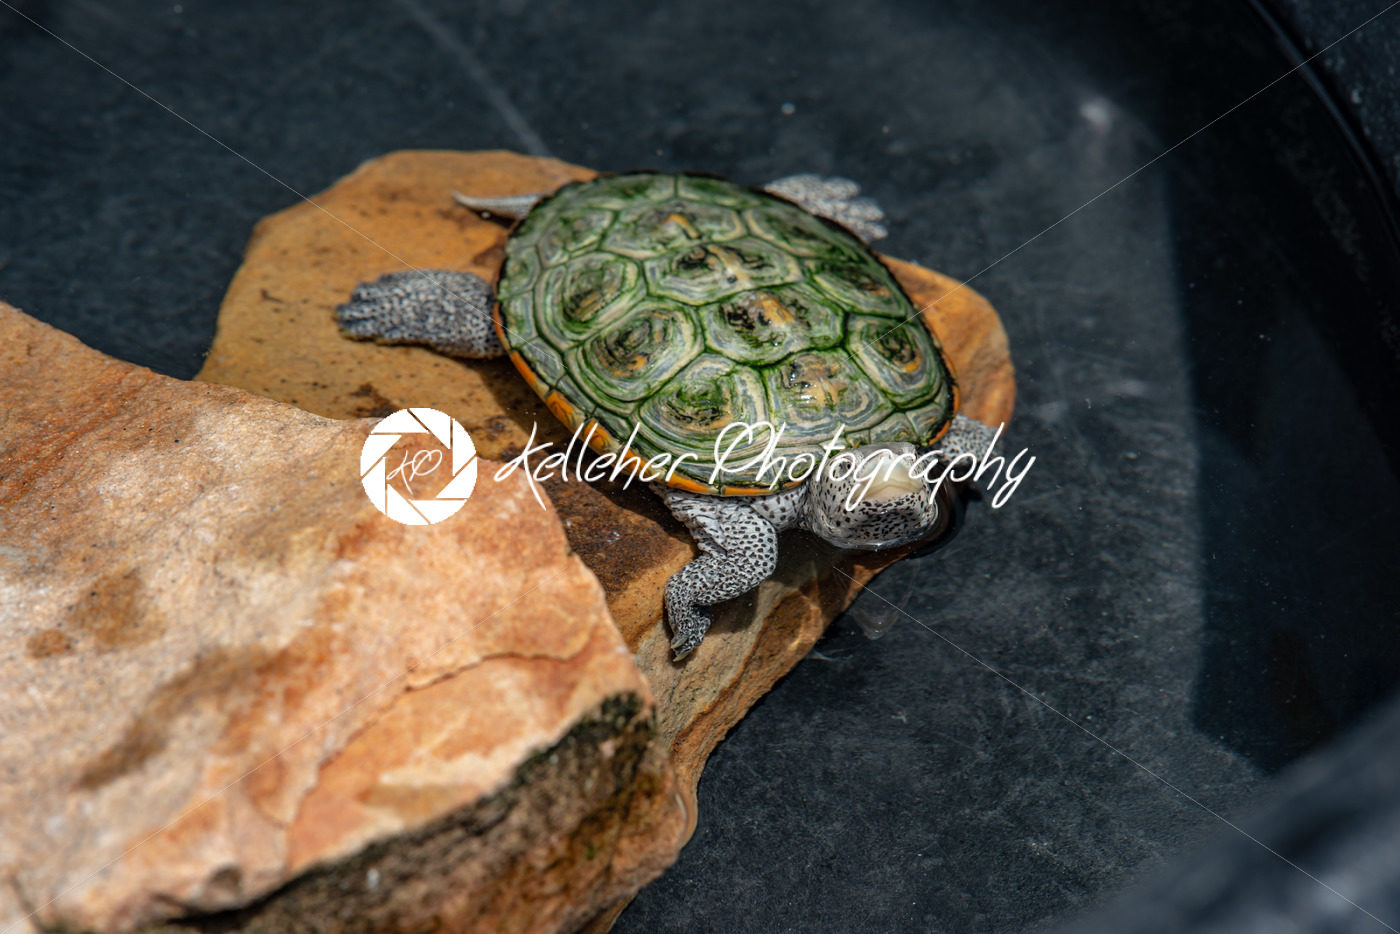 A Terrapin turtle on a rock - Kelleher Photography Store